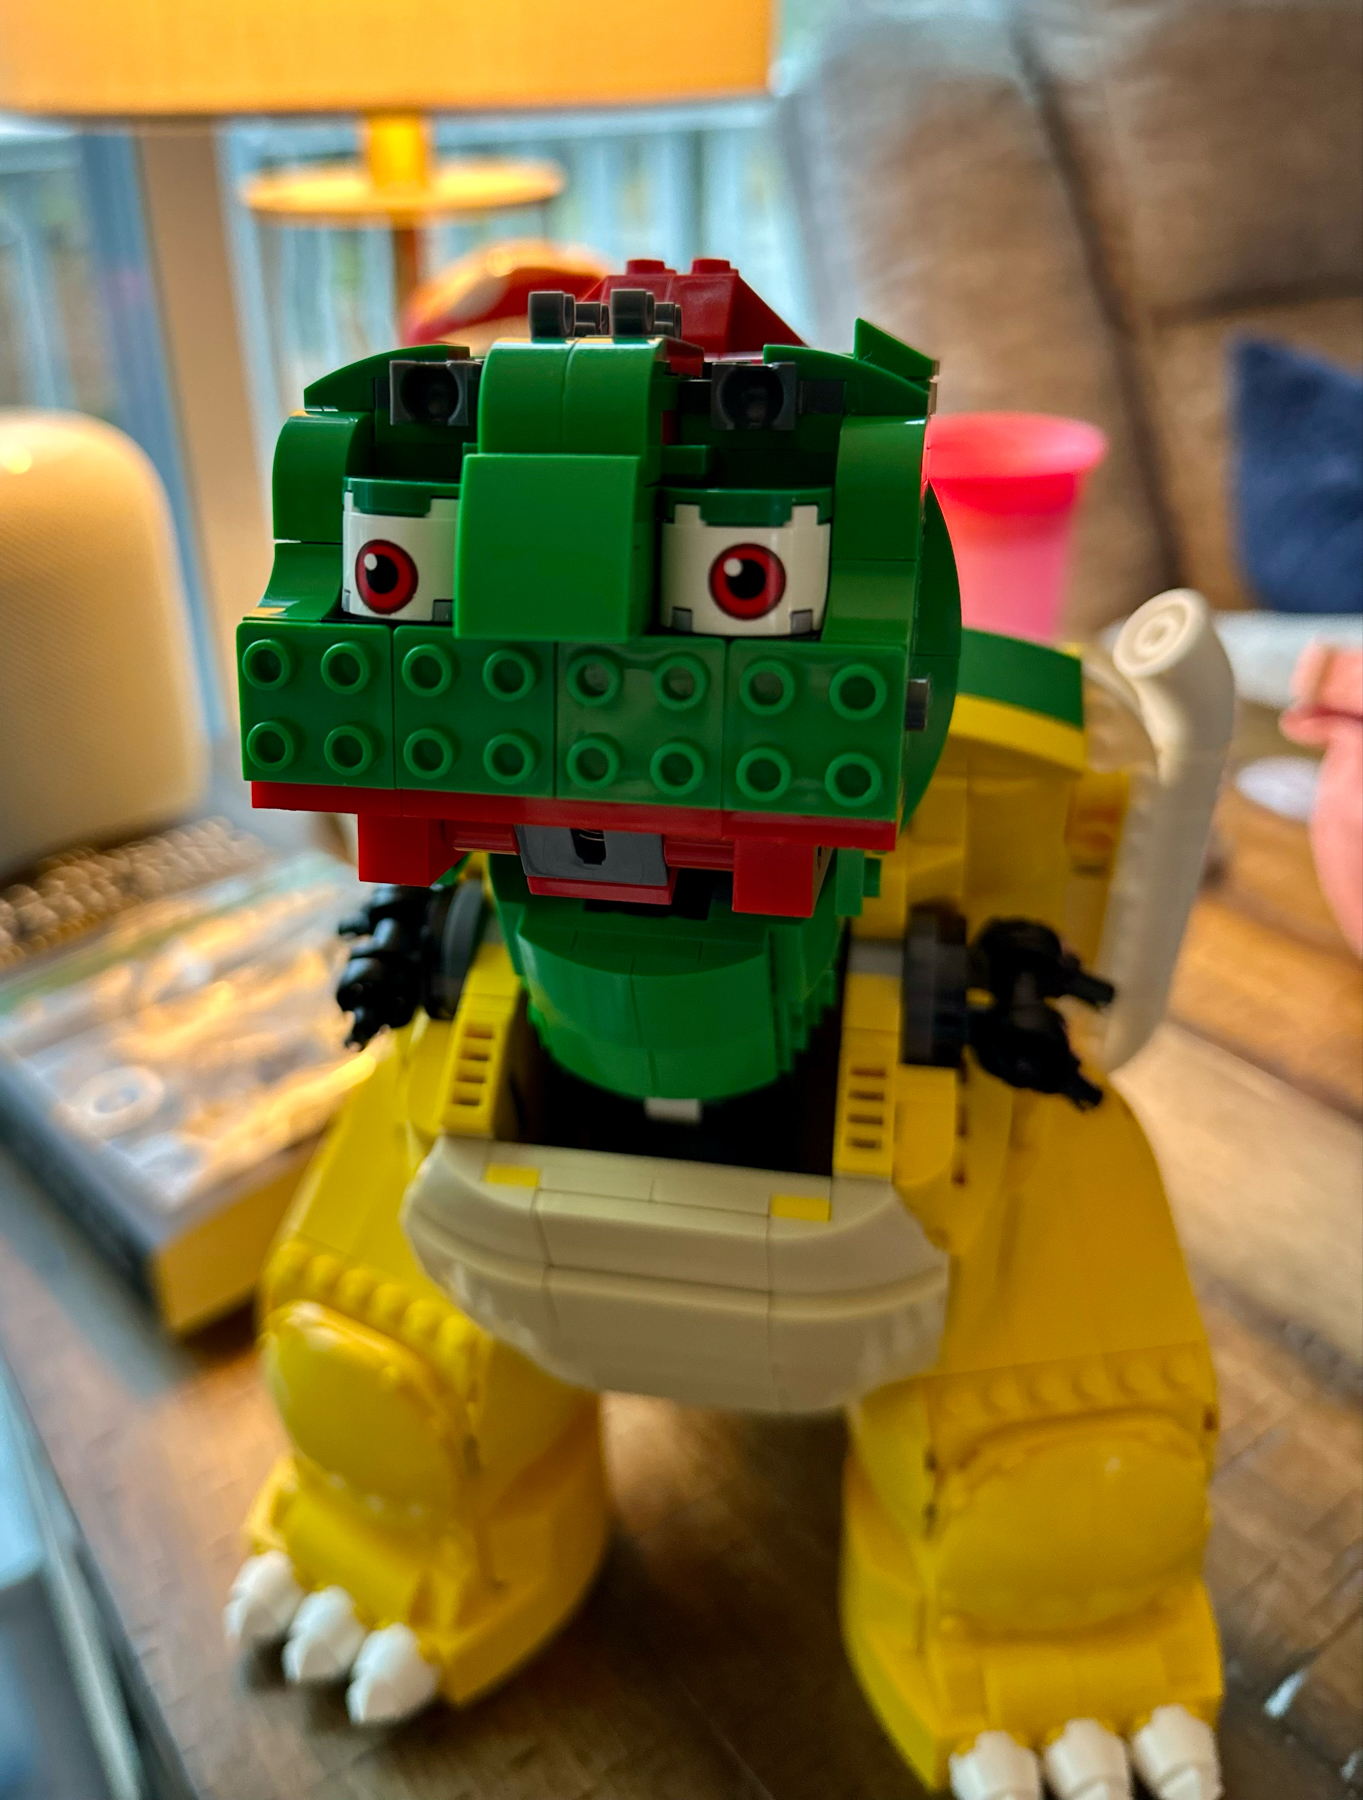 A close-up of a LEGO model dinosaur displaying its head and upper body. The dinosaur is predominantly green with touches of red and white, and has posable arms with black claws. The background is blurred with indistinct household items.